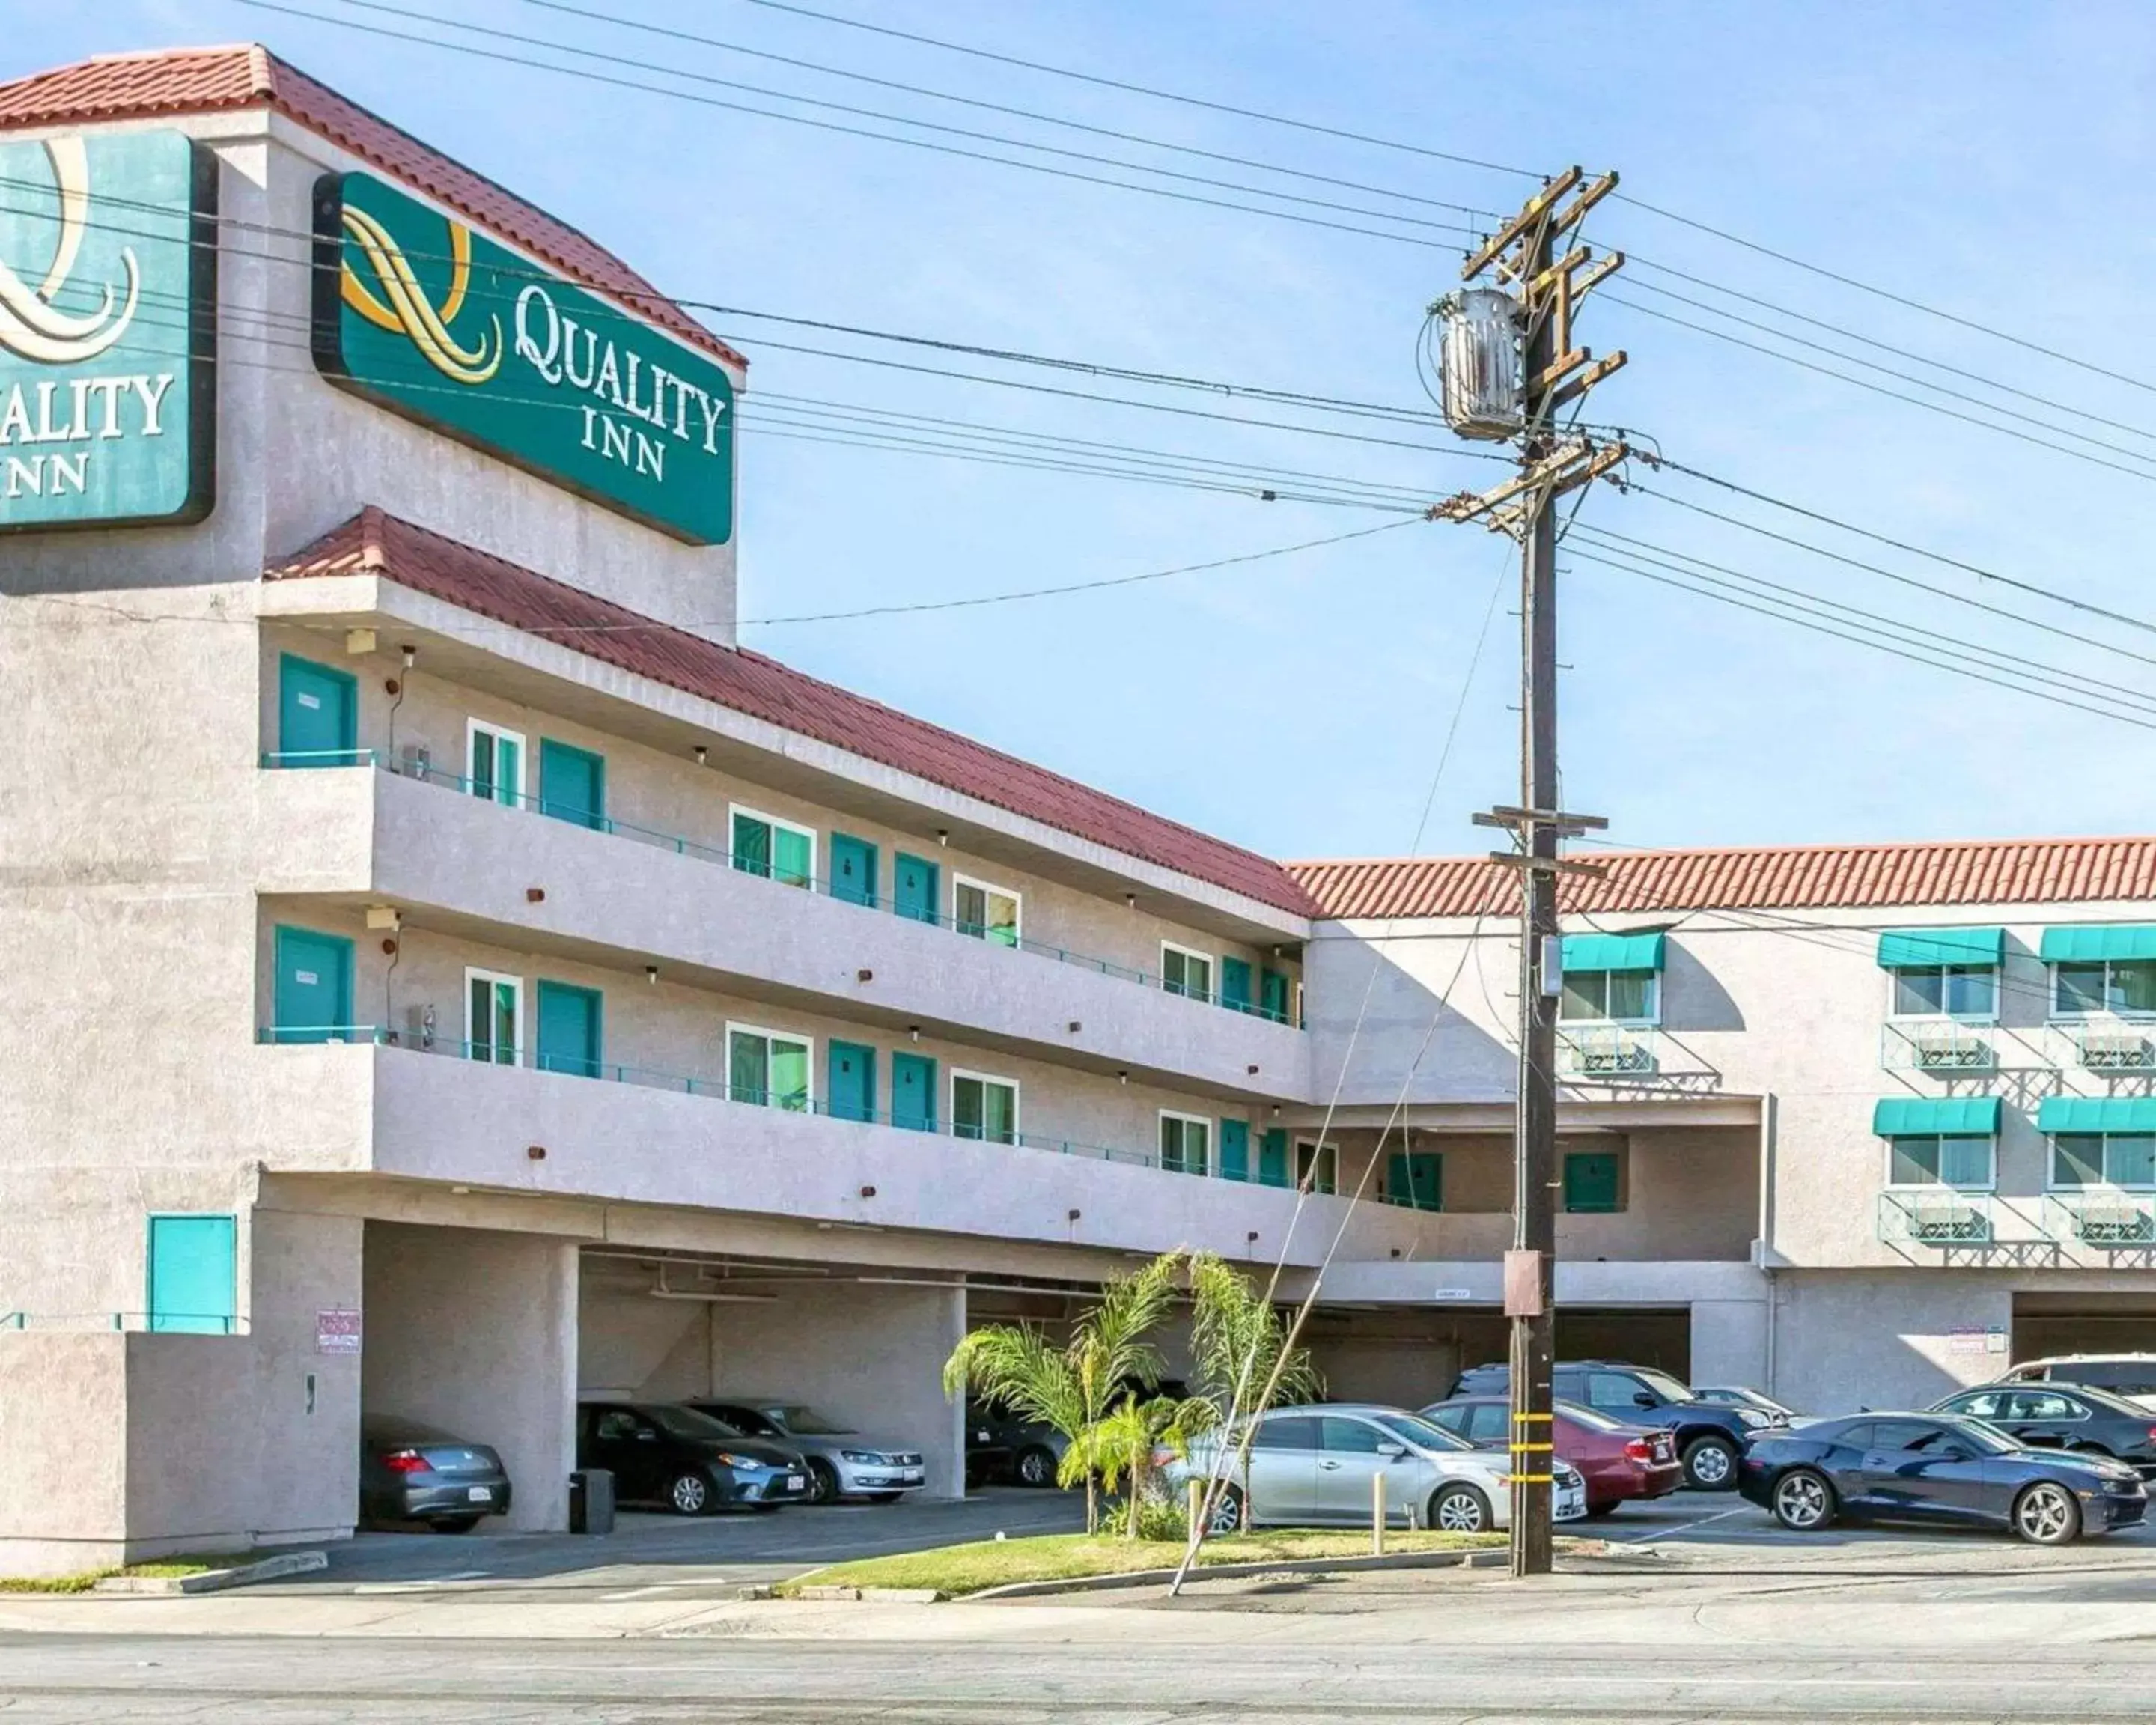 Property Building in Quality Inn Burbank Airport